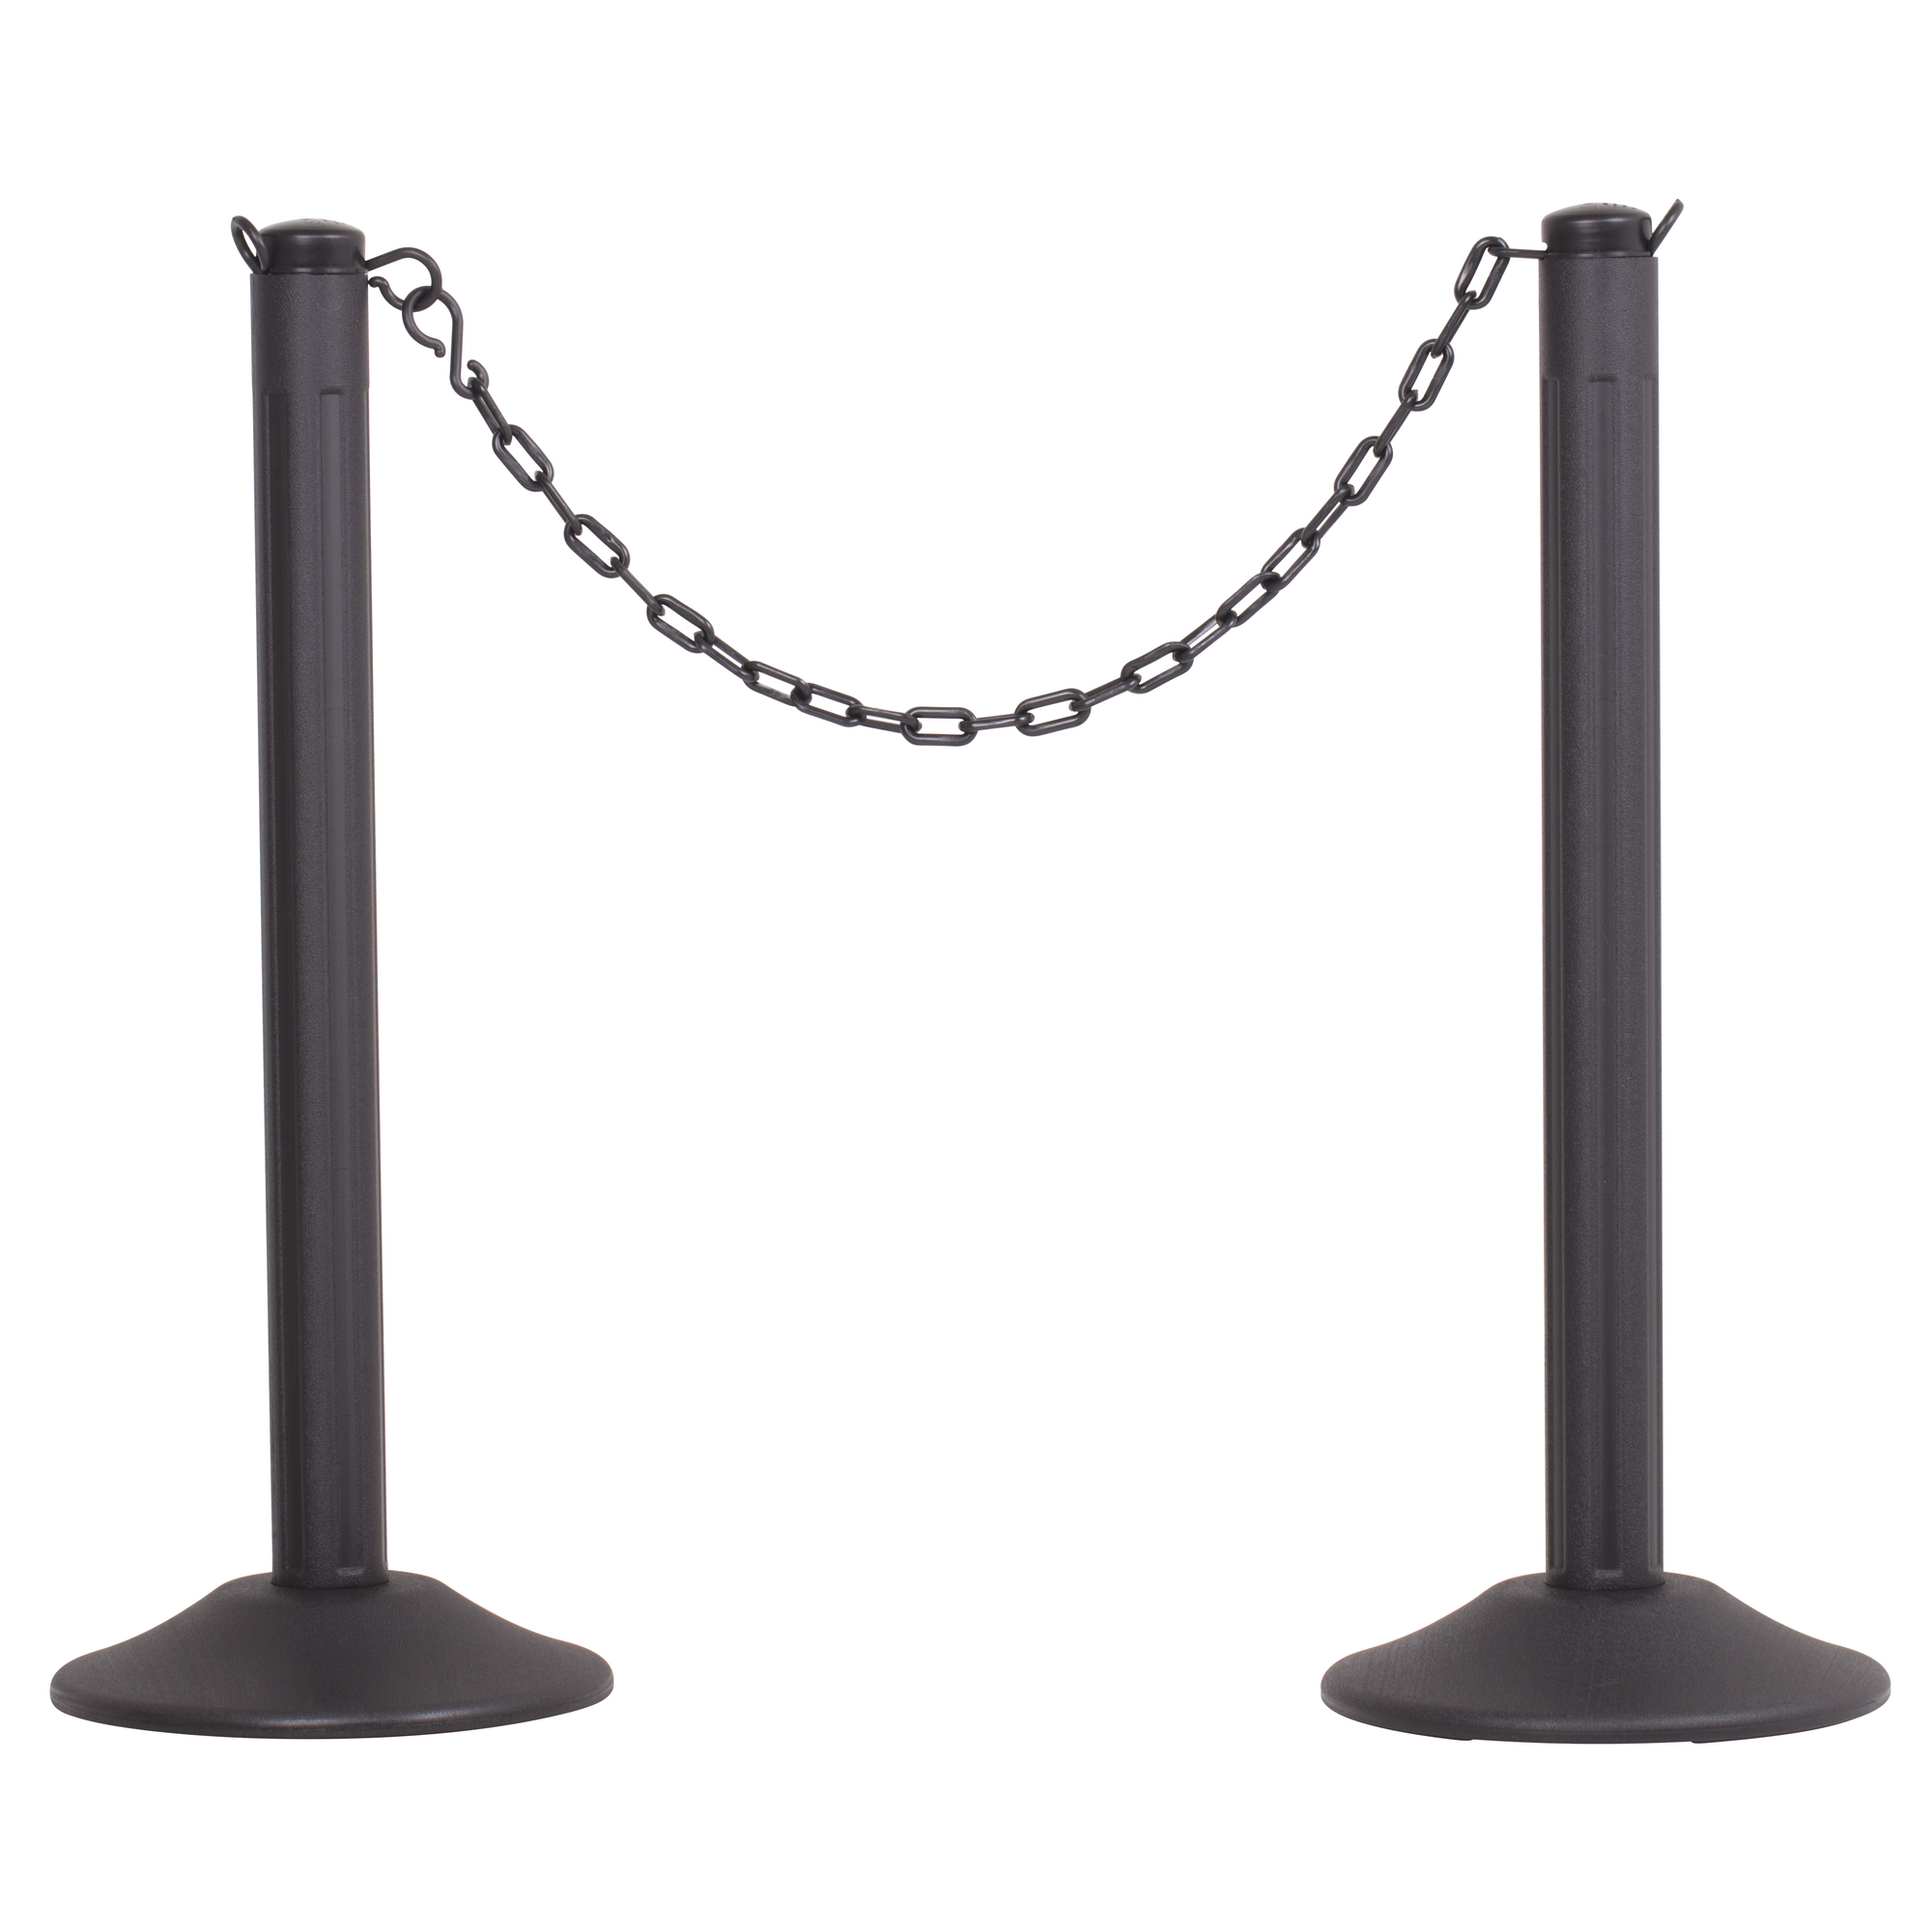 US Weight, Blk post, 10ft. of 2Inch Blk chain unweightd base 2pk, Model U2003